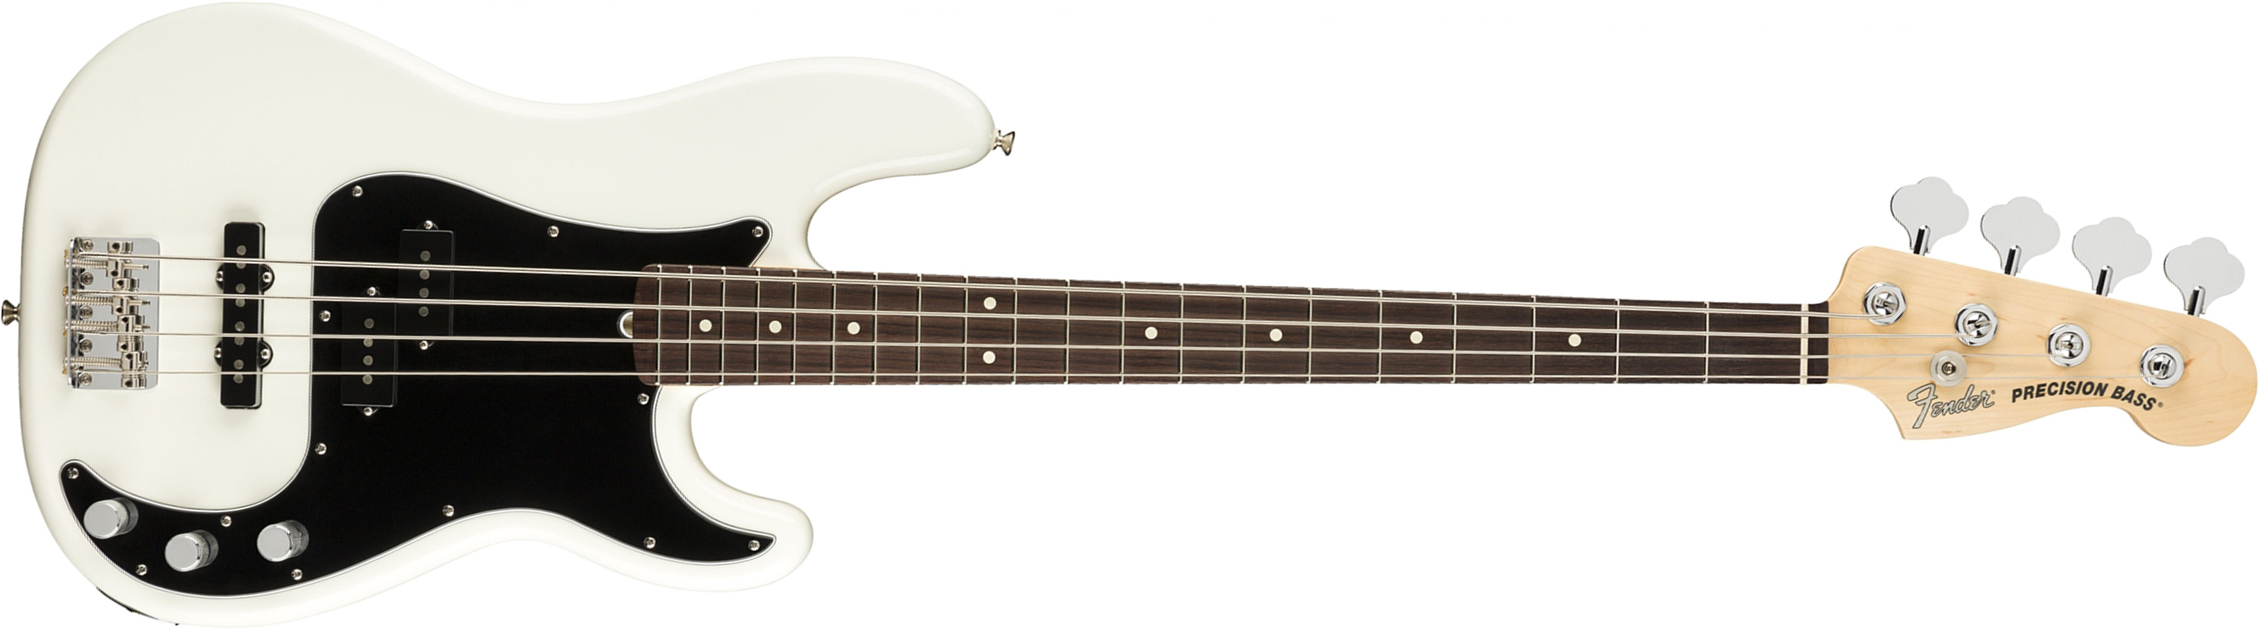 Fender Precision Bass American Performer Usa Rw - Arctic White - Basse Électrique Solid Body - Main picture